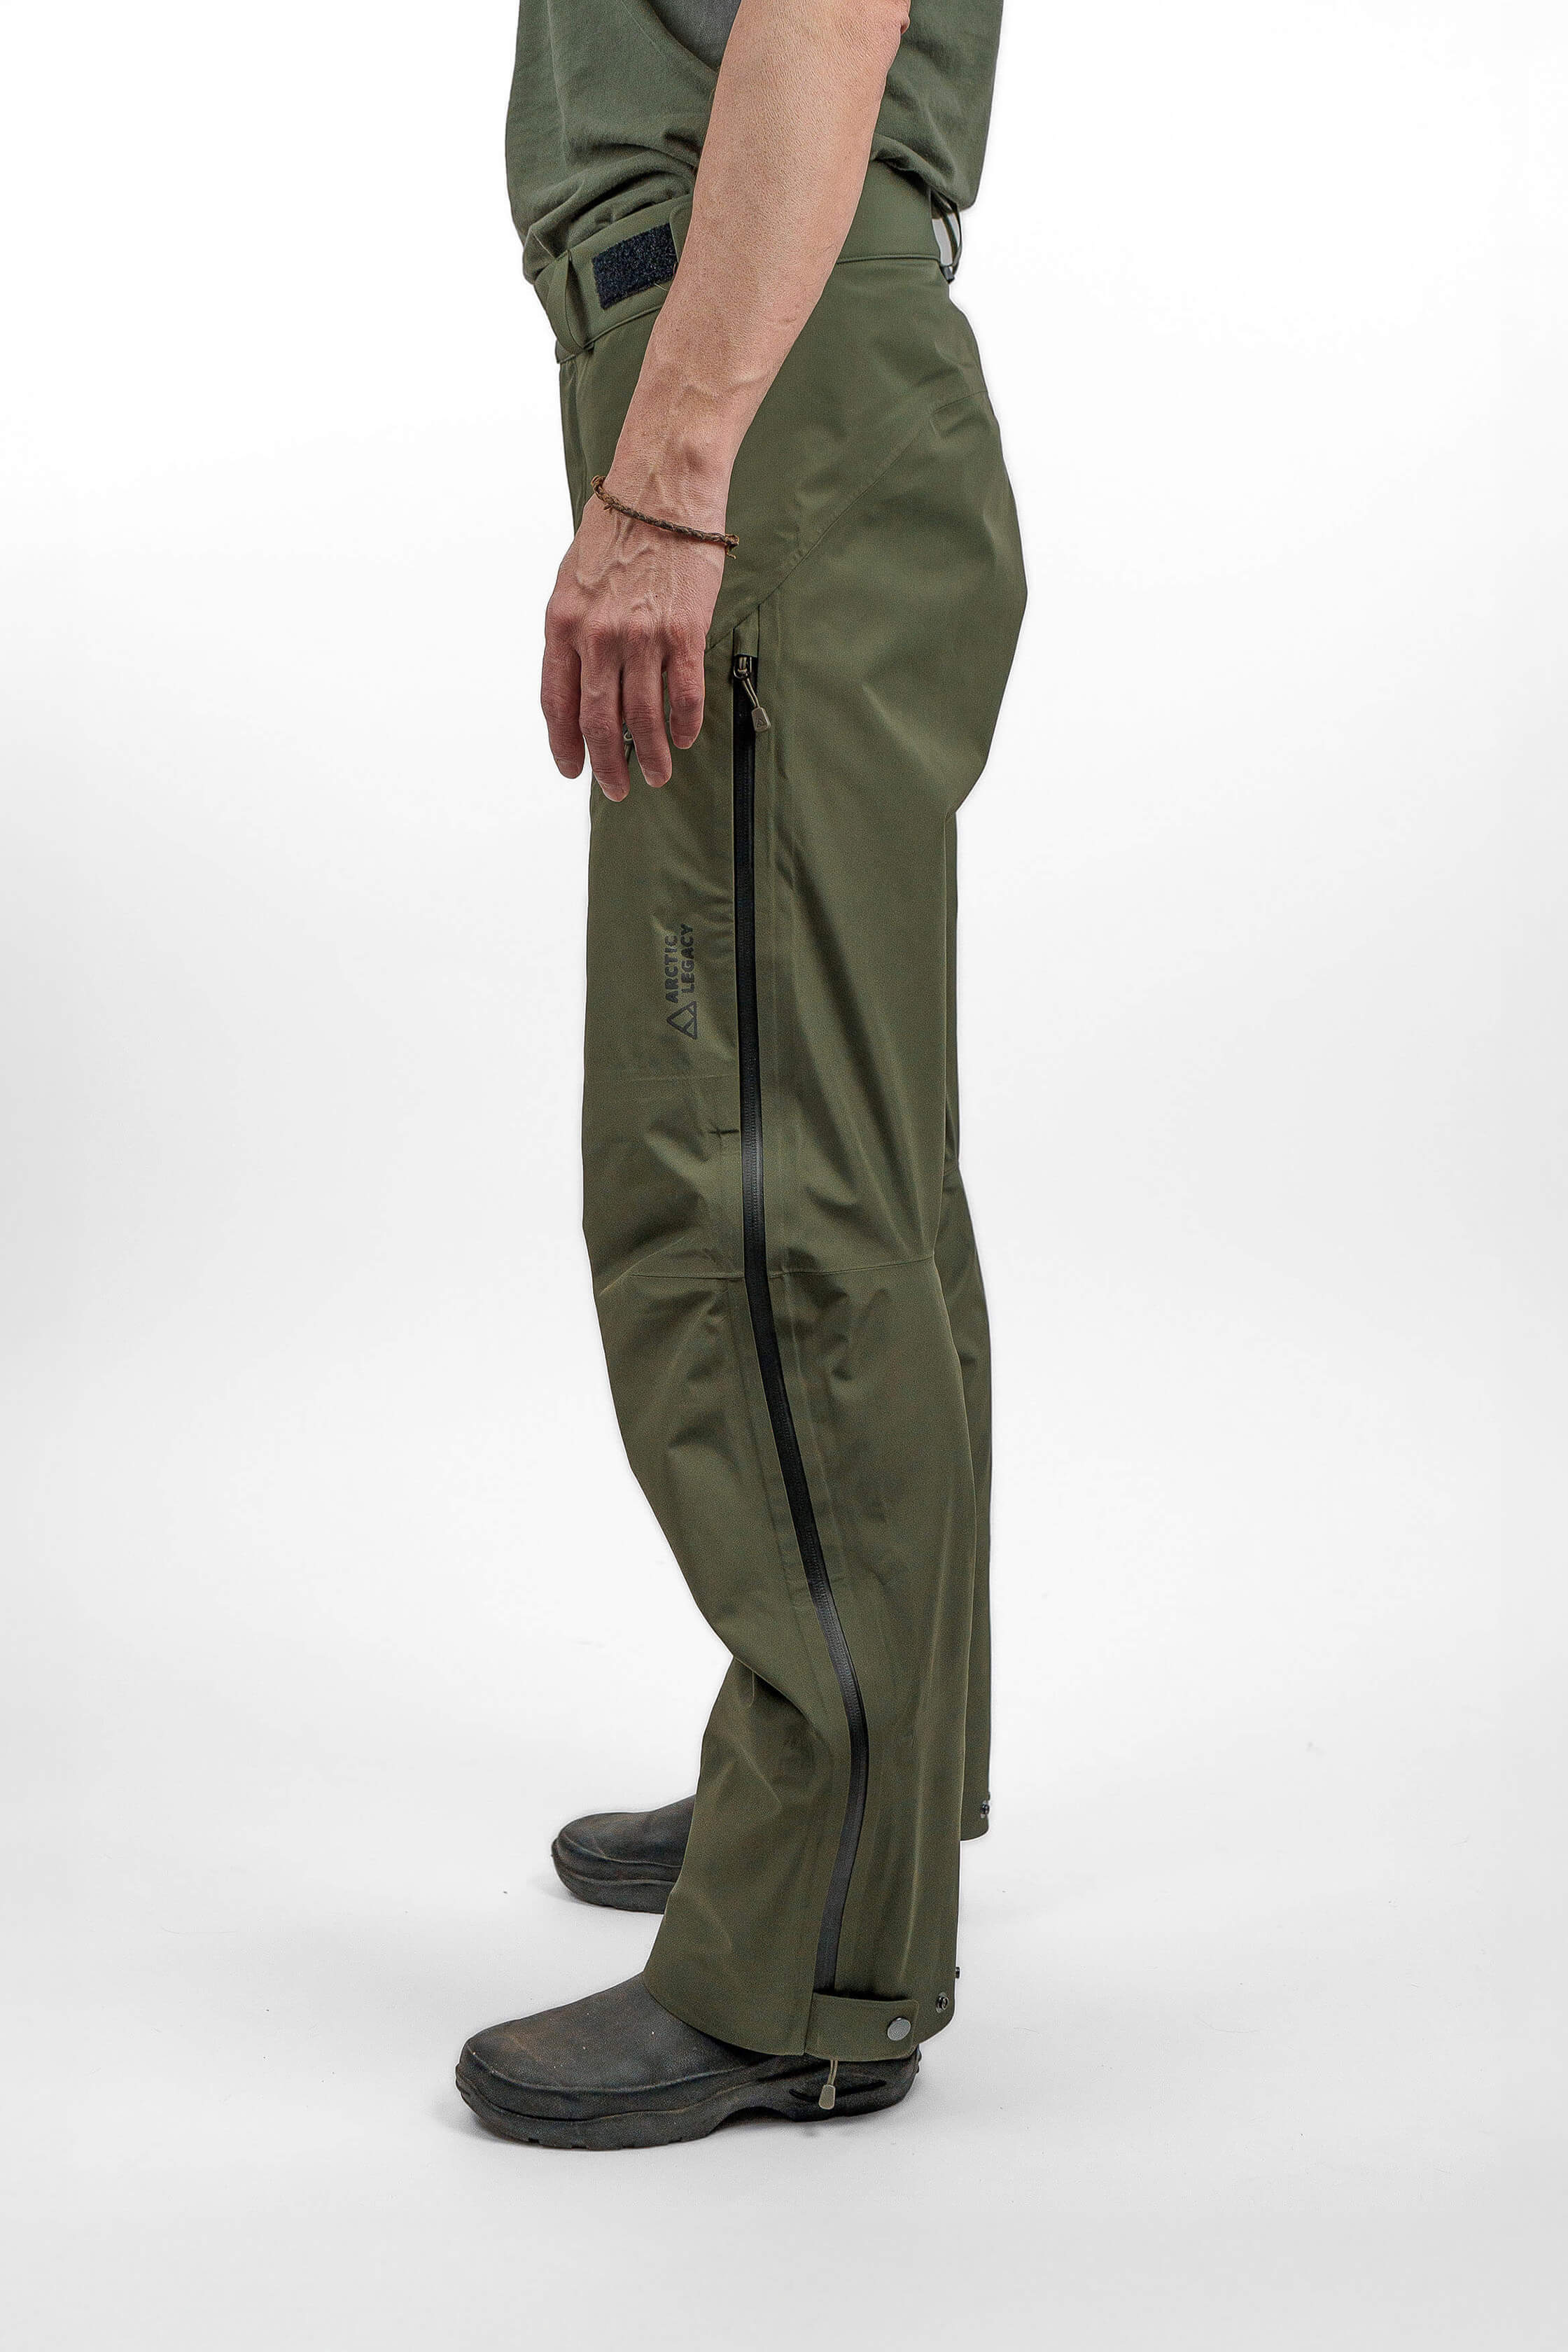 Green hardshell pants in unisex sizing - side view of the Arctic Legacy Nuka Elements 3 layer Pants#color_dusty-olive